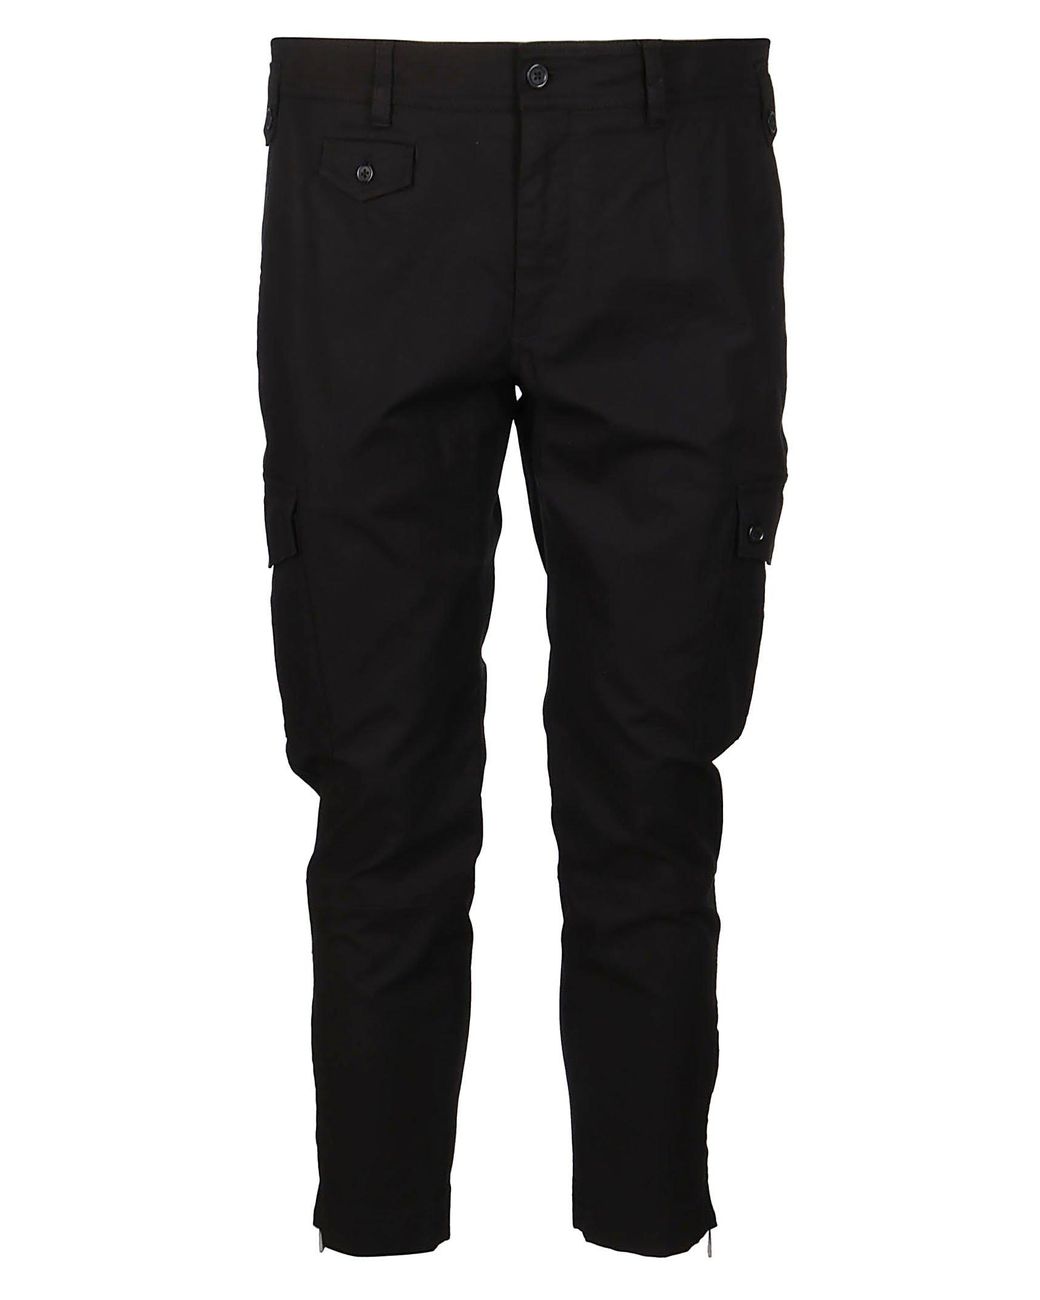 Dolce & Gabbana Cotton Cargo Trousers in Black for Men - Lyst